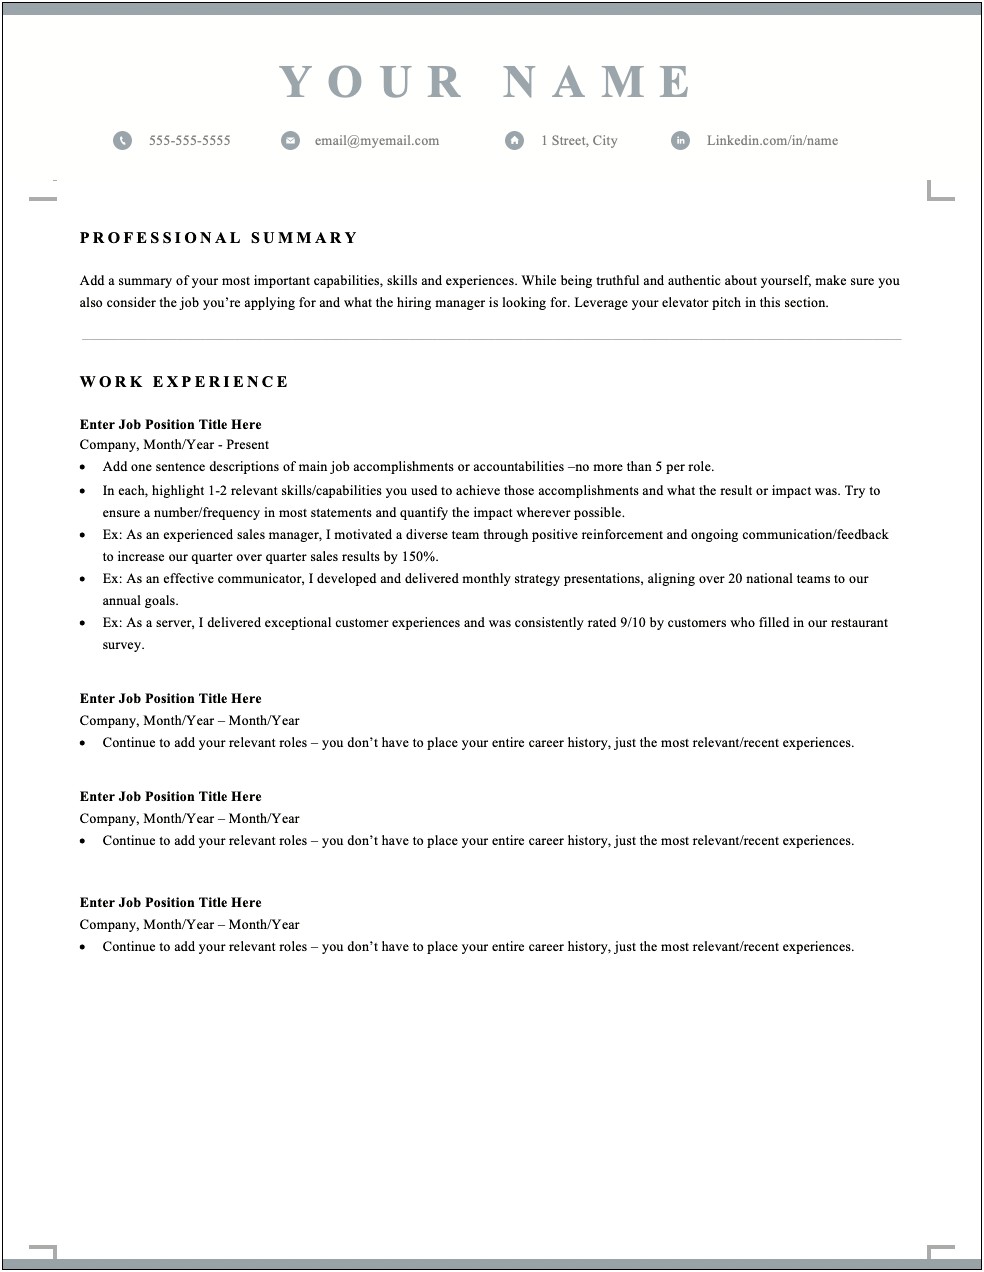 Profession Format Of Resume And Cover Letter